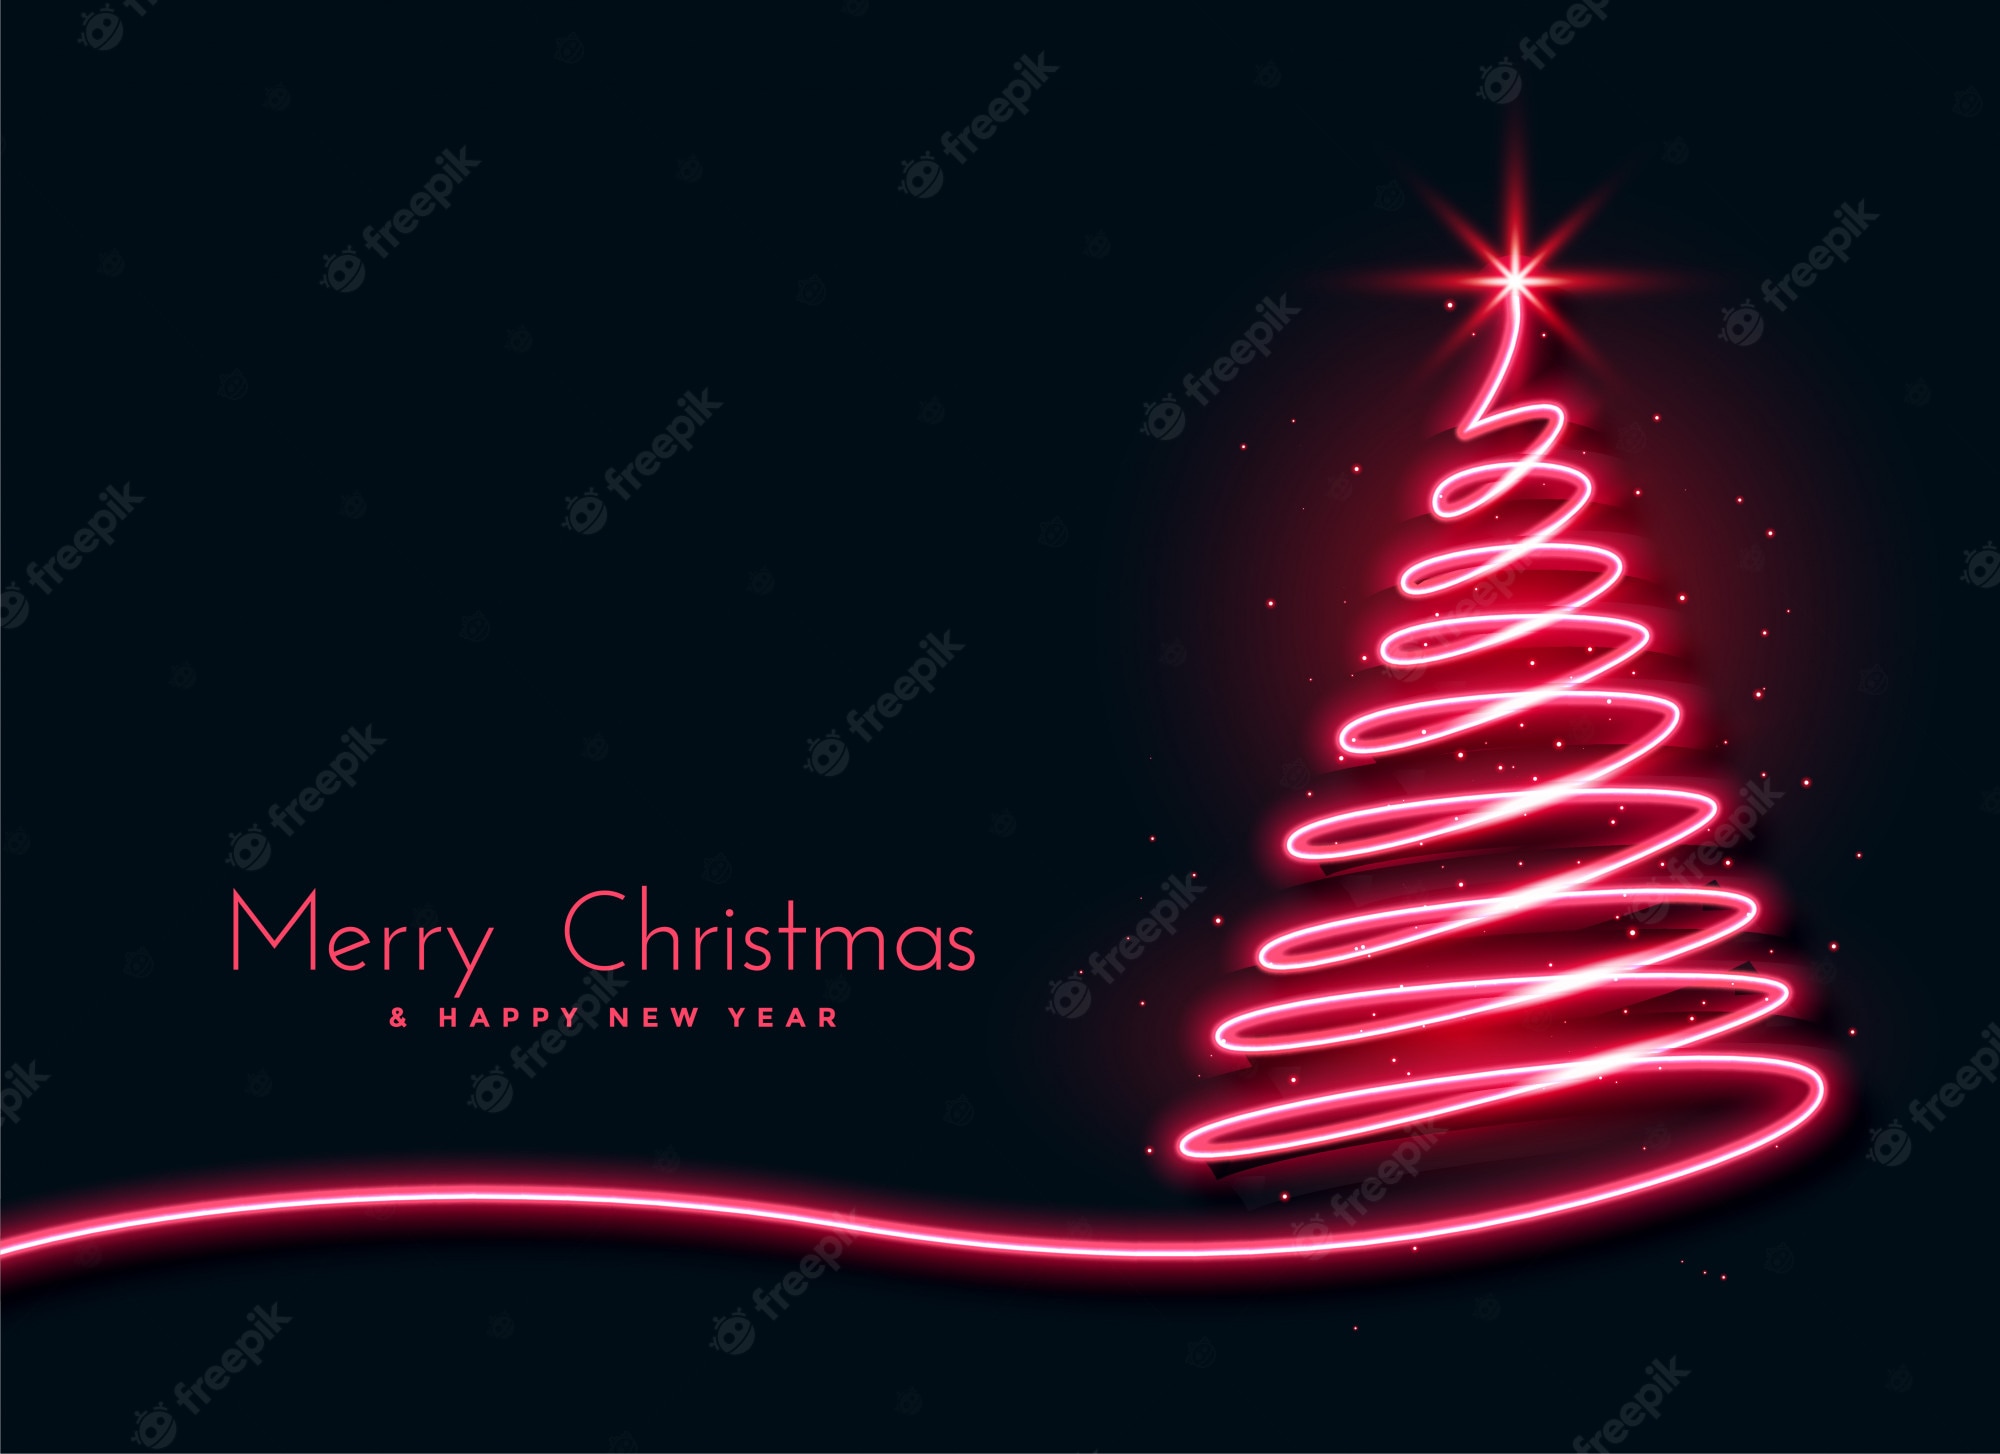 Free Vector. Red neon christmas tree creative design background